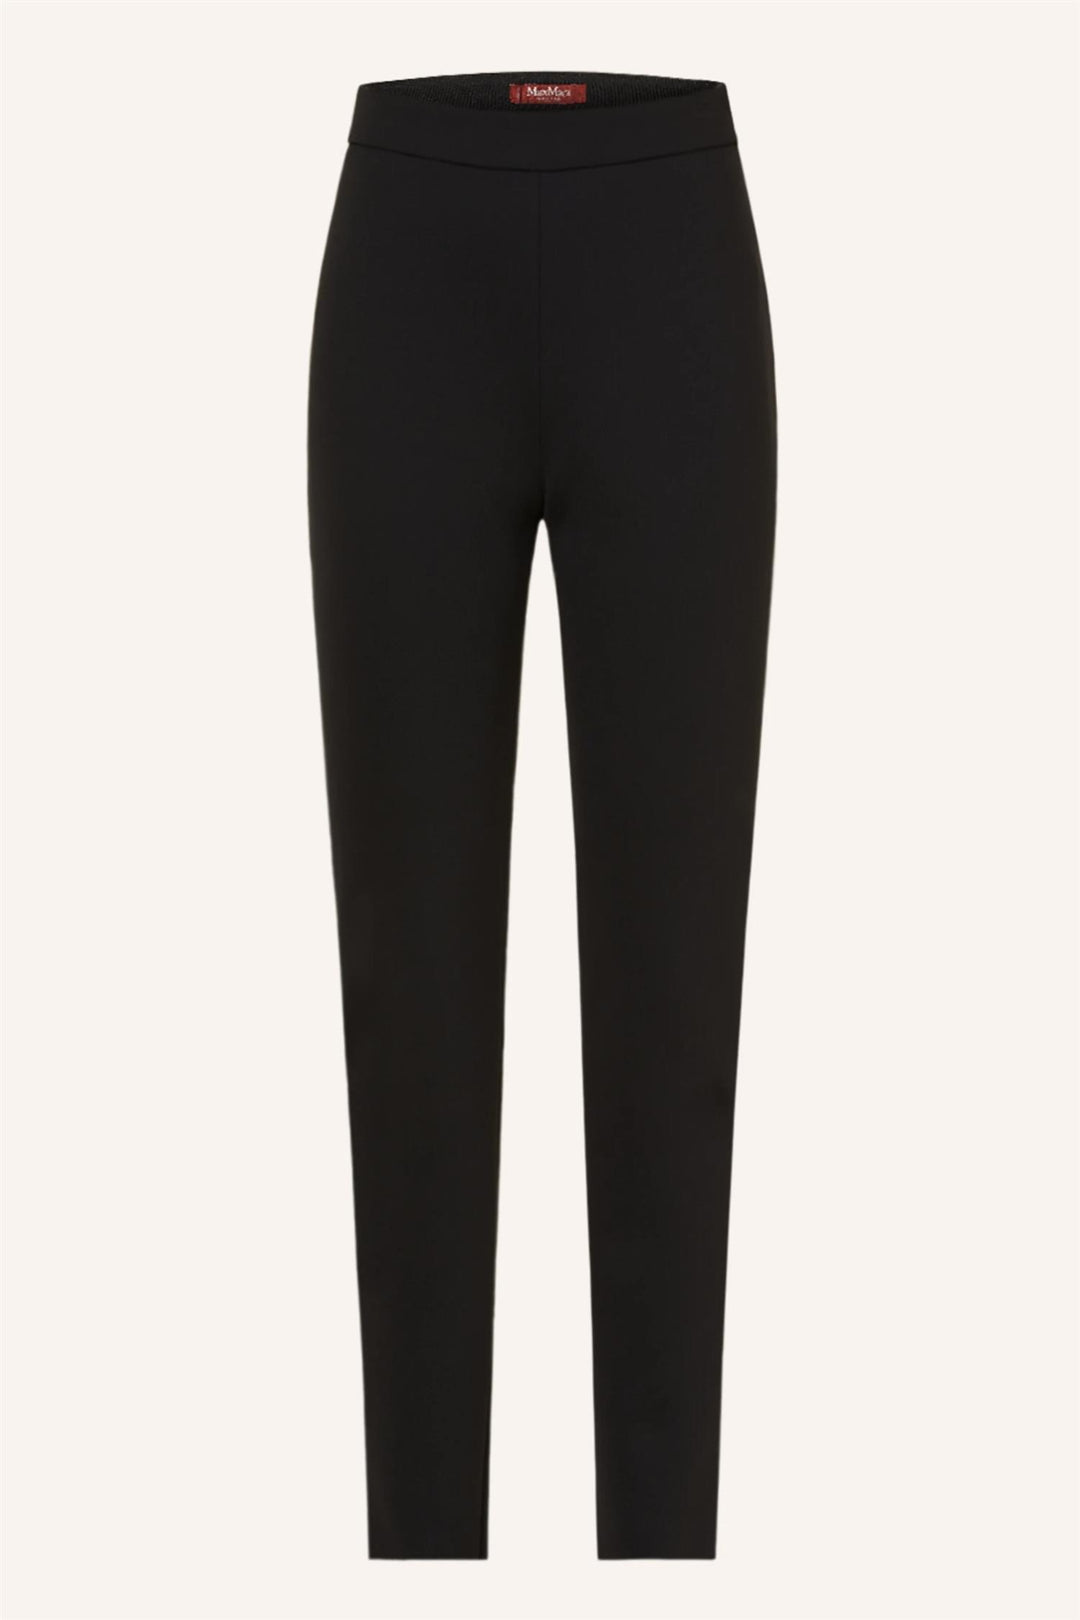 SONNI JERSEY TROUSER